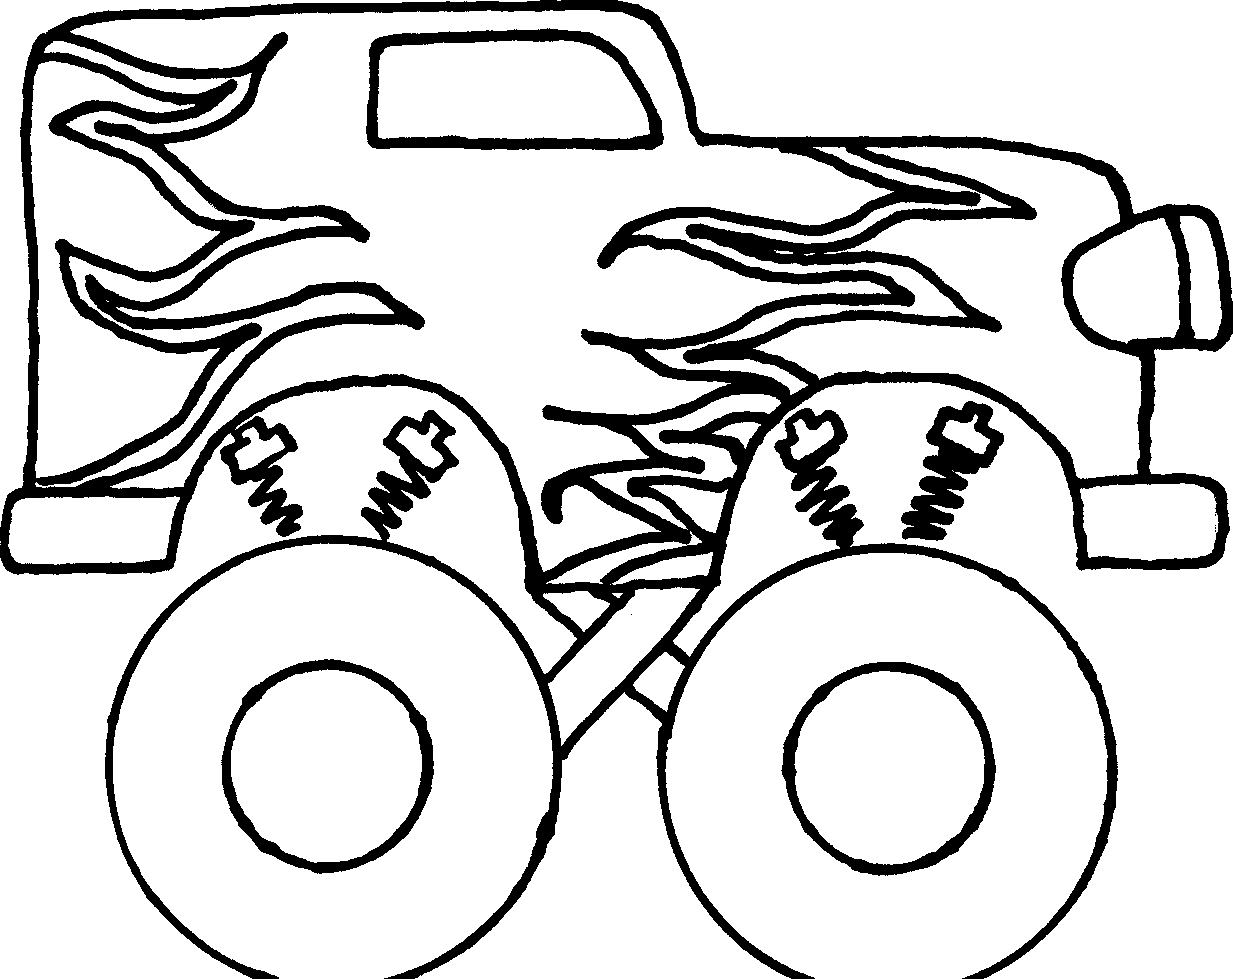 Free Truck Drawing For Kids Download Free Clip Art Free Clip Art On Clipart Library